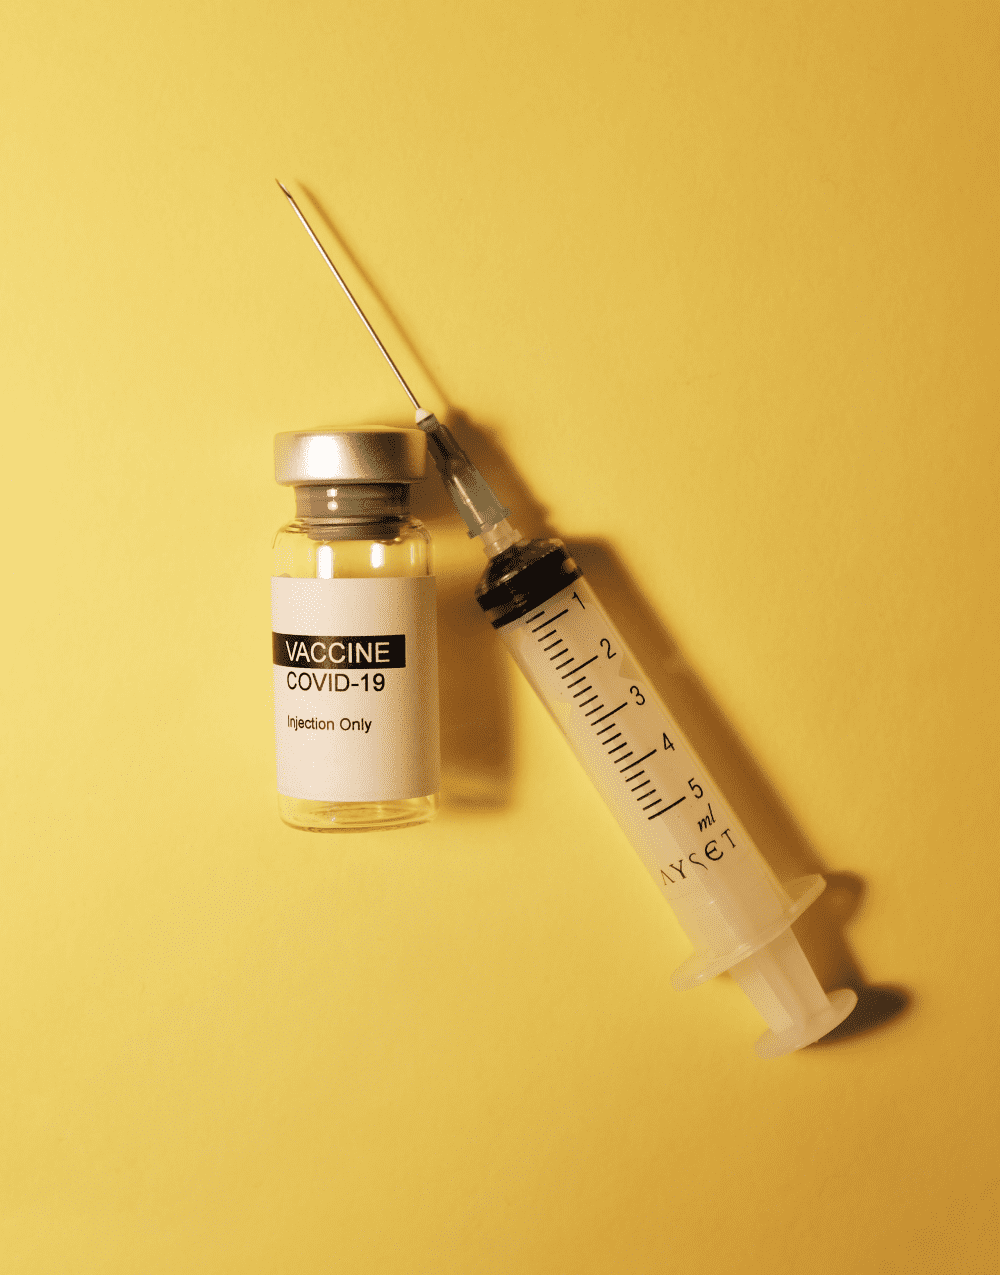 vial and syringe containing the covid-19 vaccine